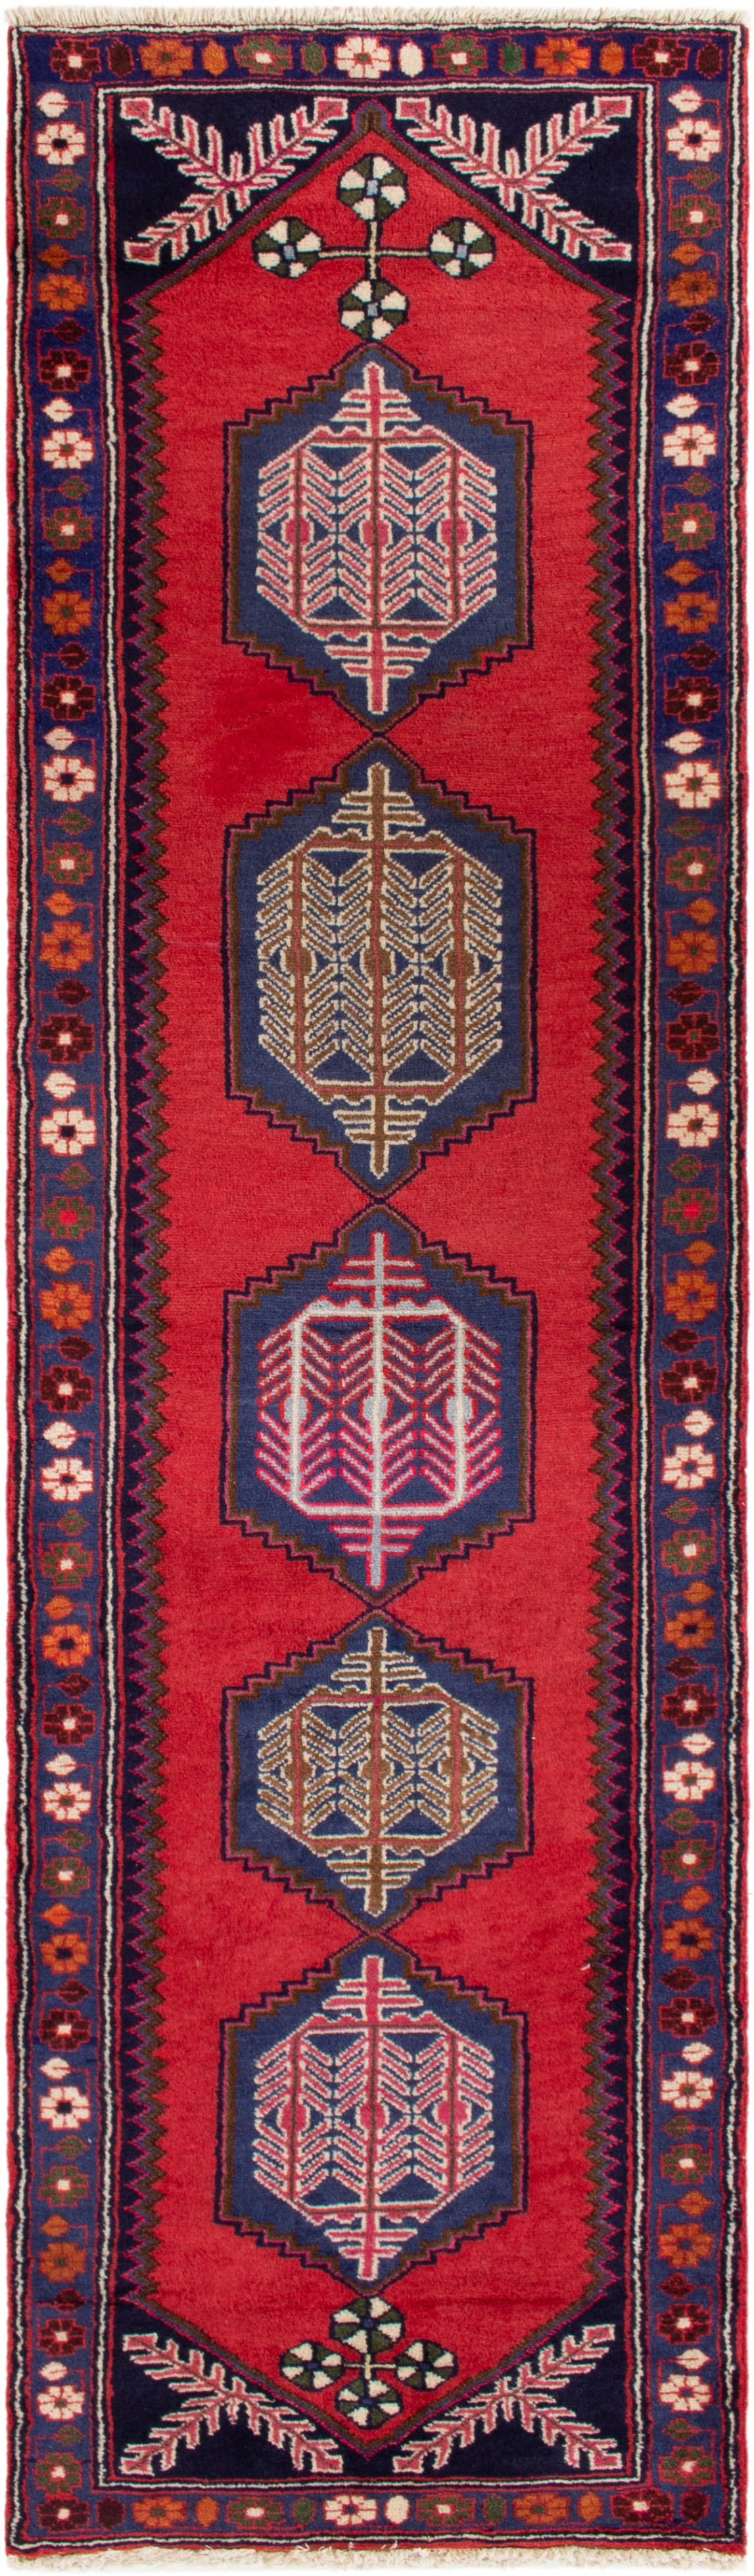 Hand-knotted Saveh  Wool Rug 2'7" x 9'2" Size: 2'7" x 9'2"  